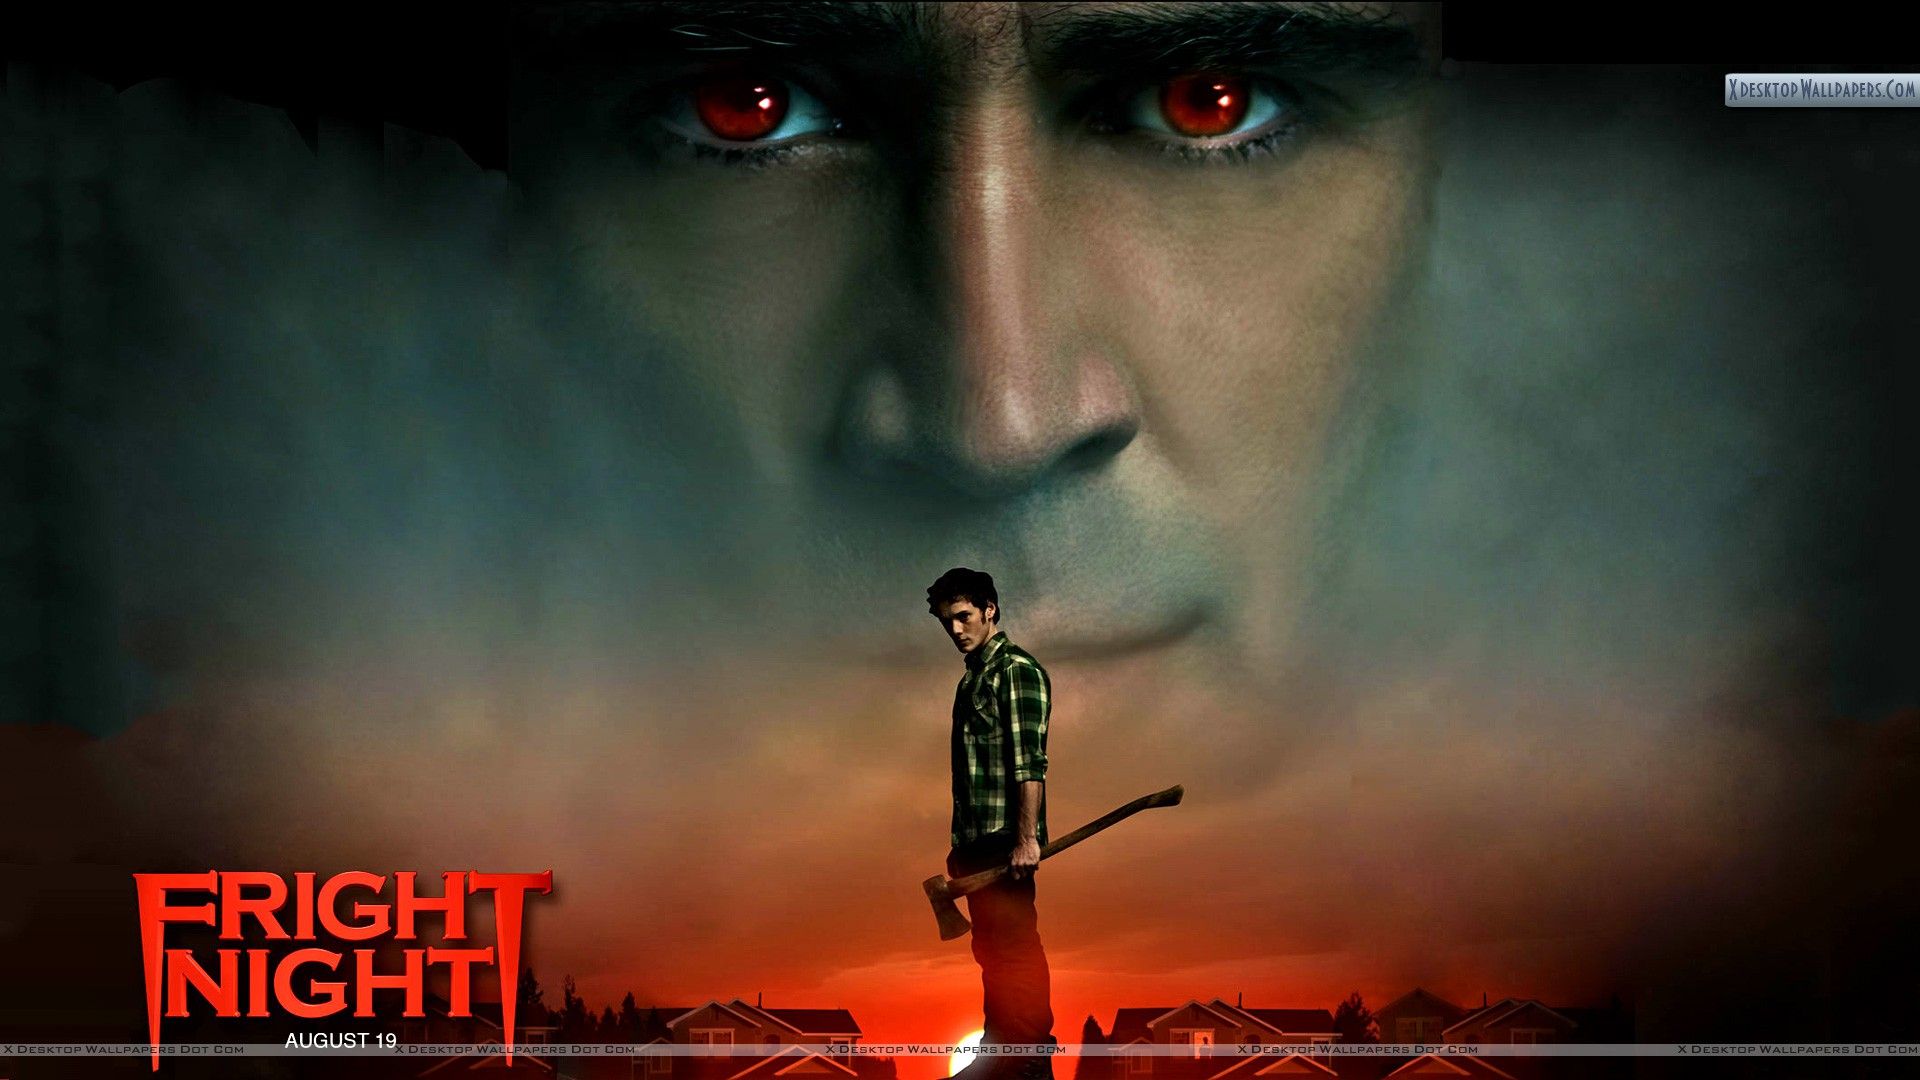 Fright Night Wallpaper, Photo & Image in HD